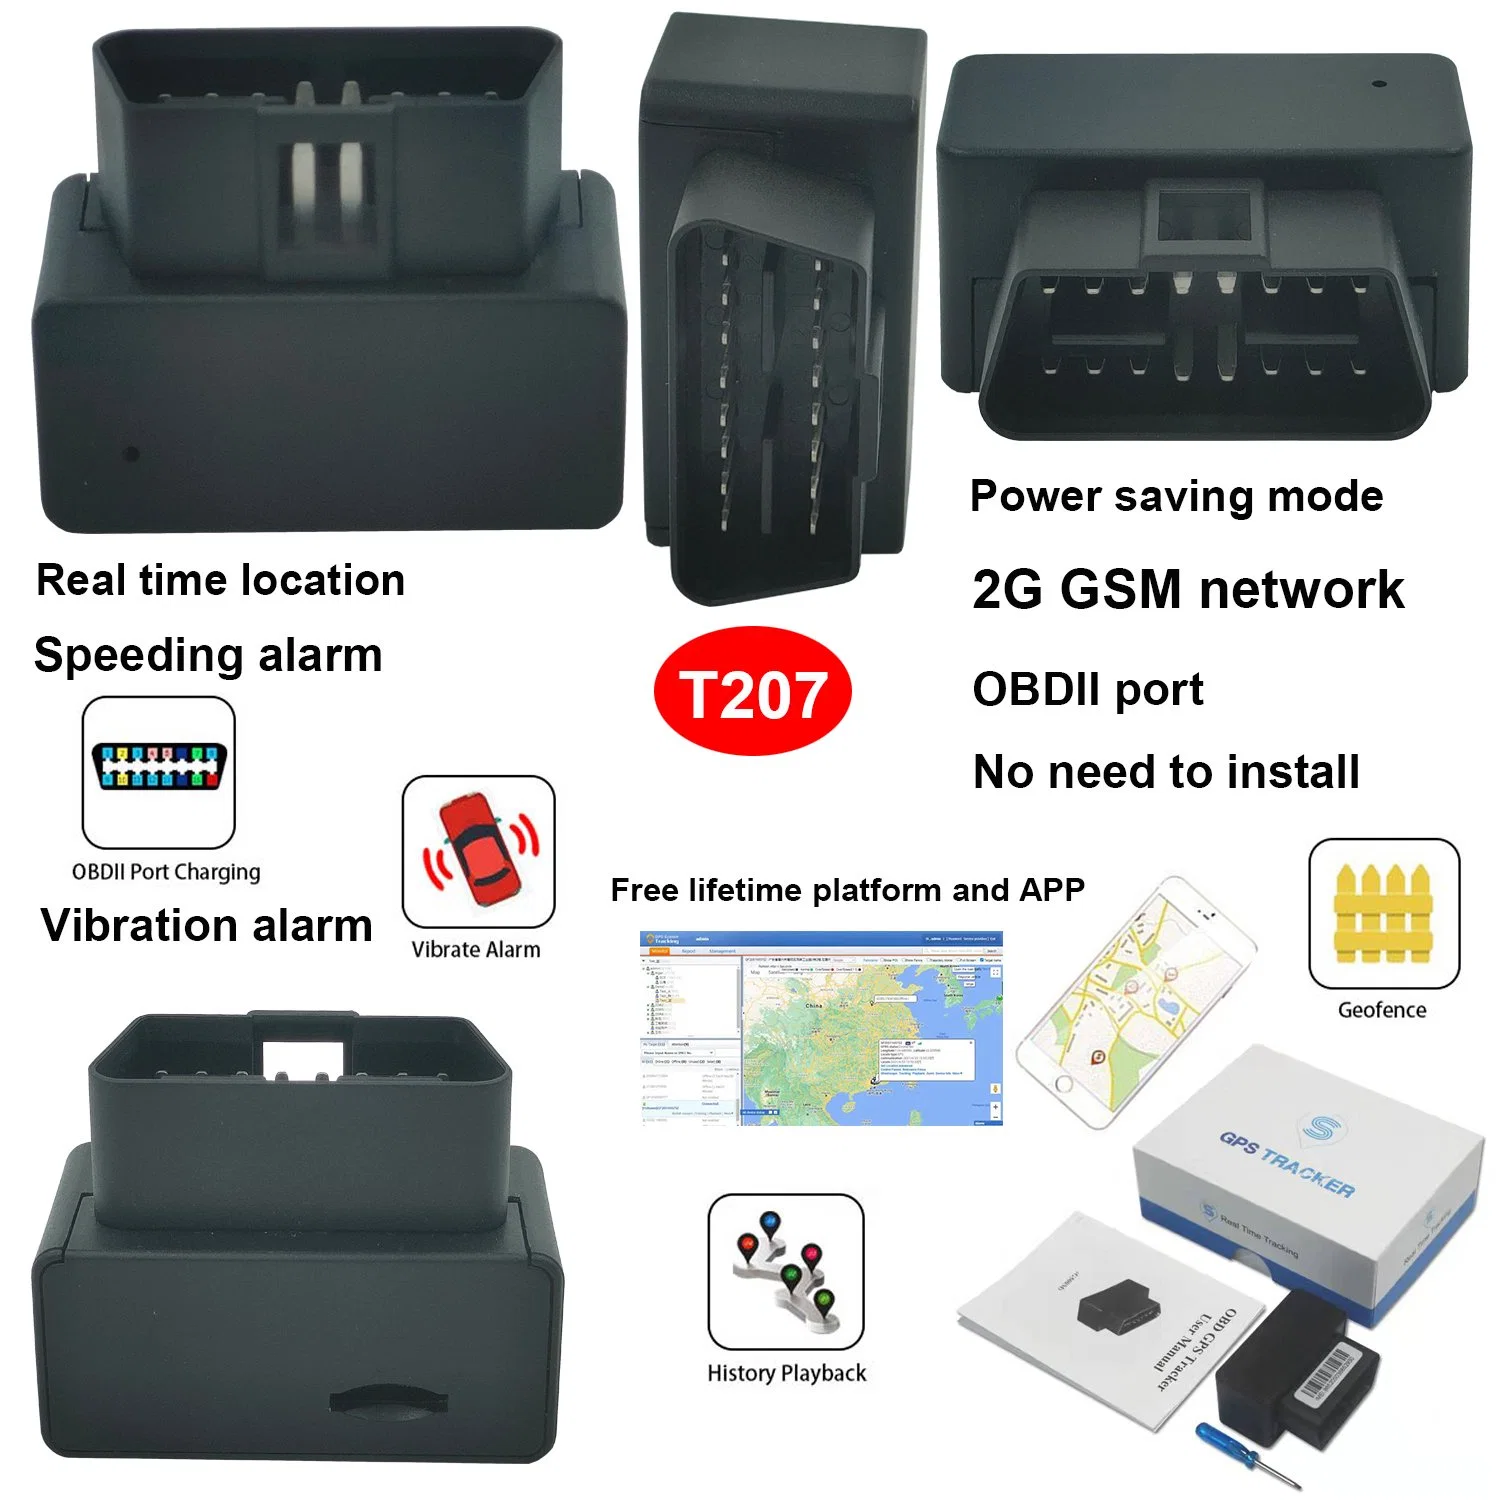 Quality 2G Anti-theft OBDII Security Tracker Container Truck Vehicle Car GPS Tracking with Power Failure Alarm T207